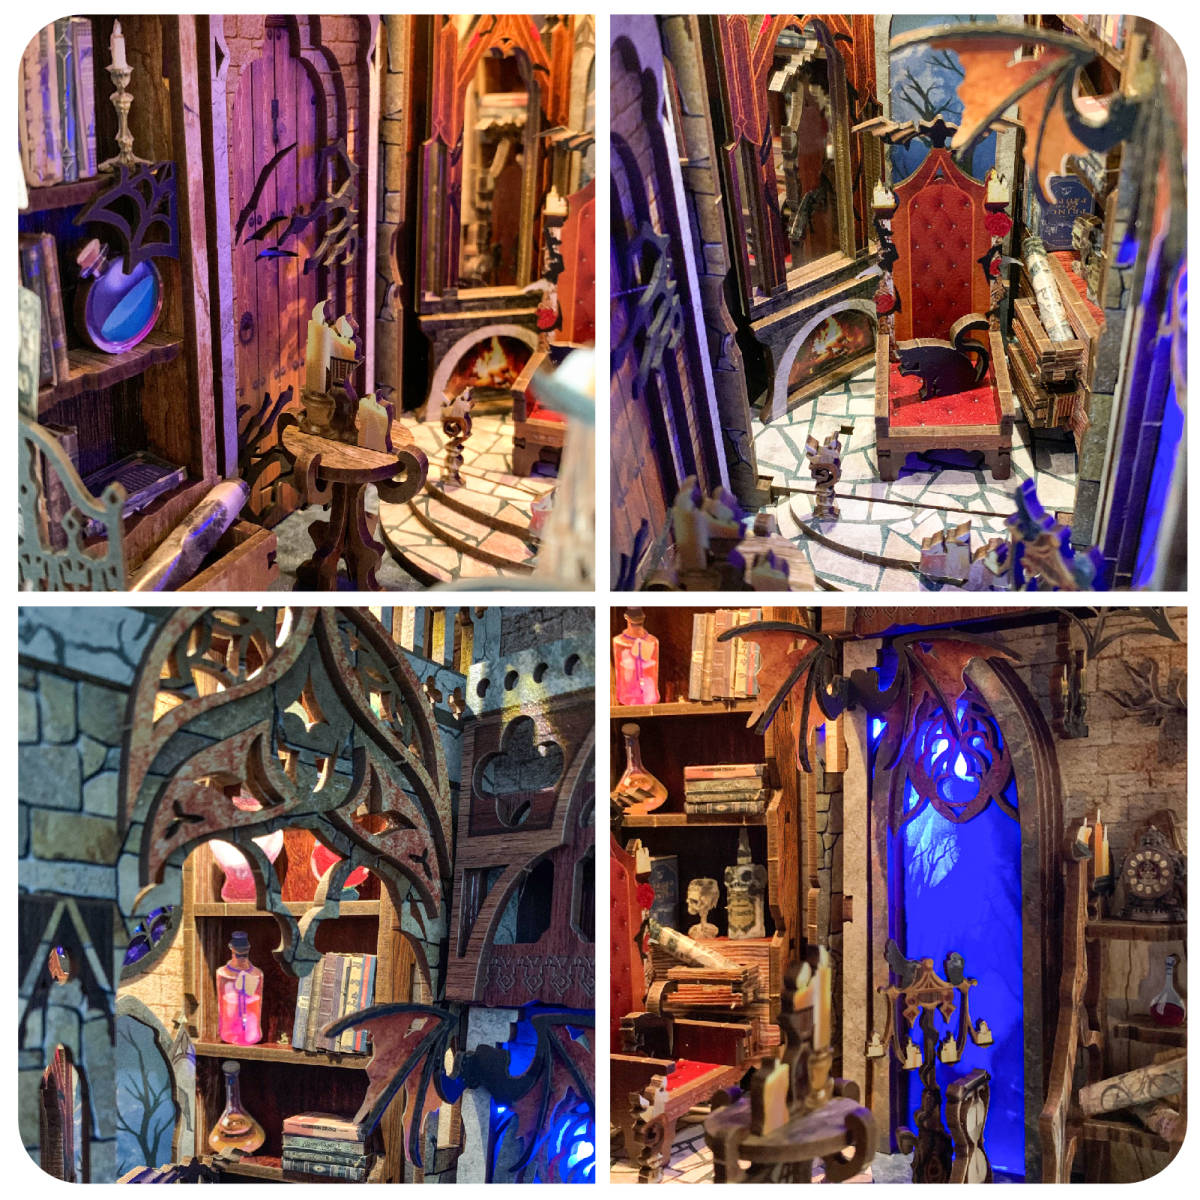 [ same day shipping ]* wooden puzzle * book nk* magic. ... castle *LED light attaching 